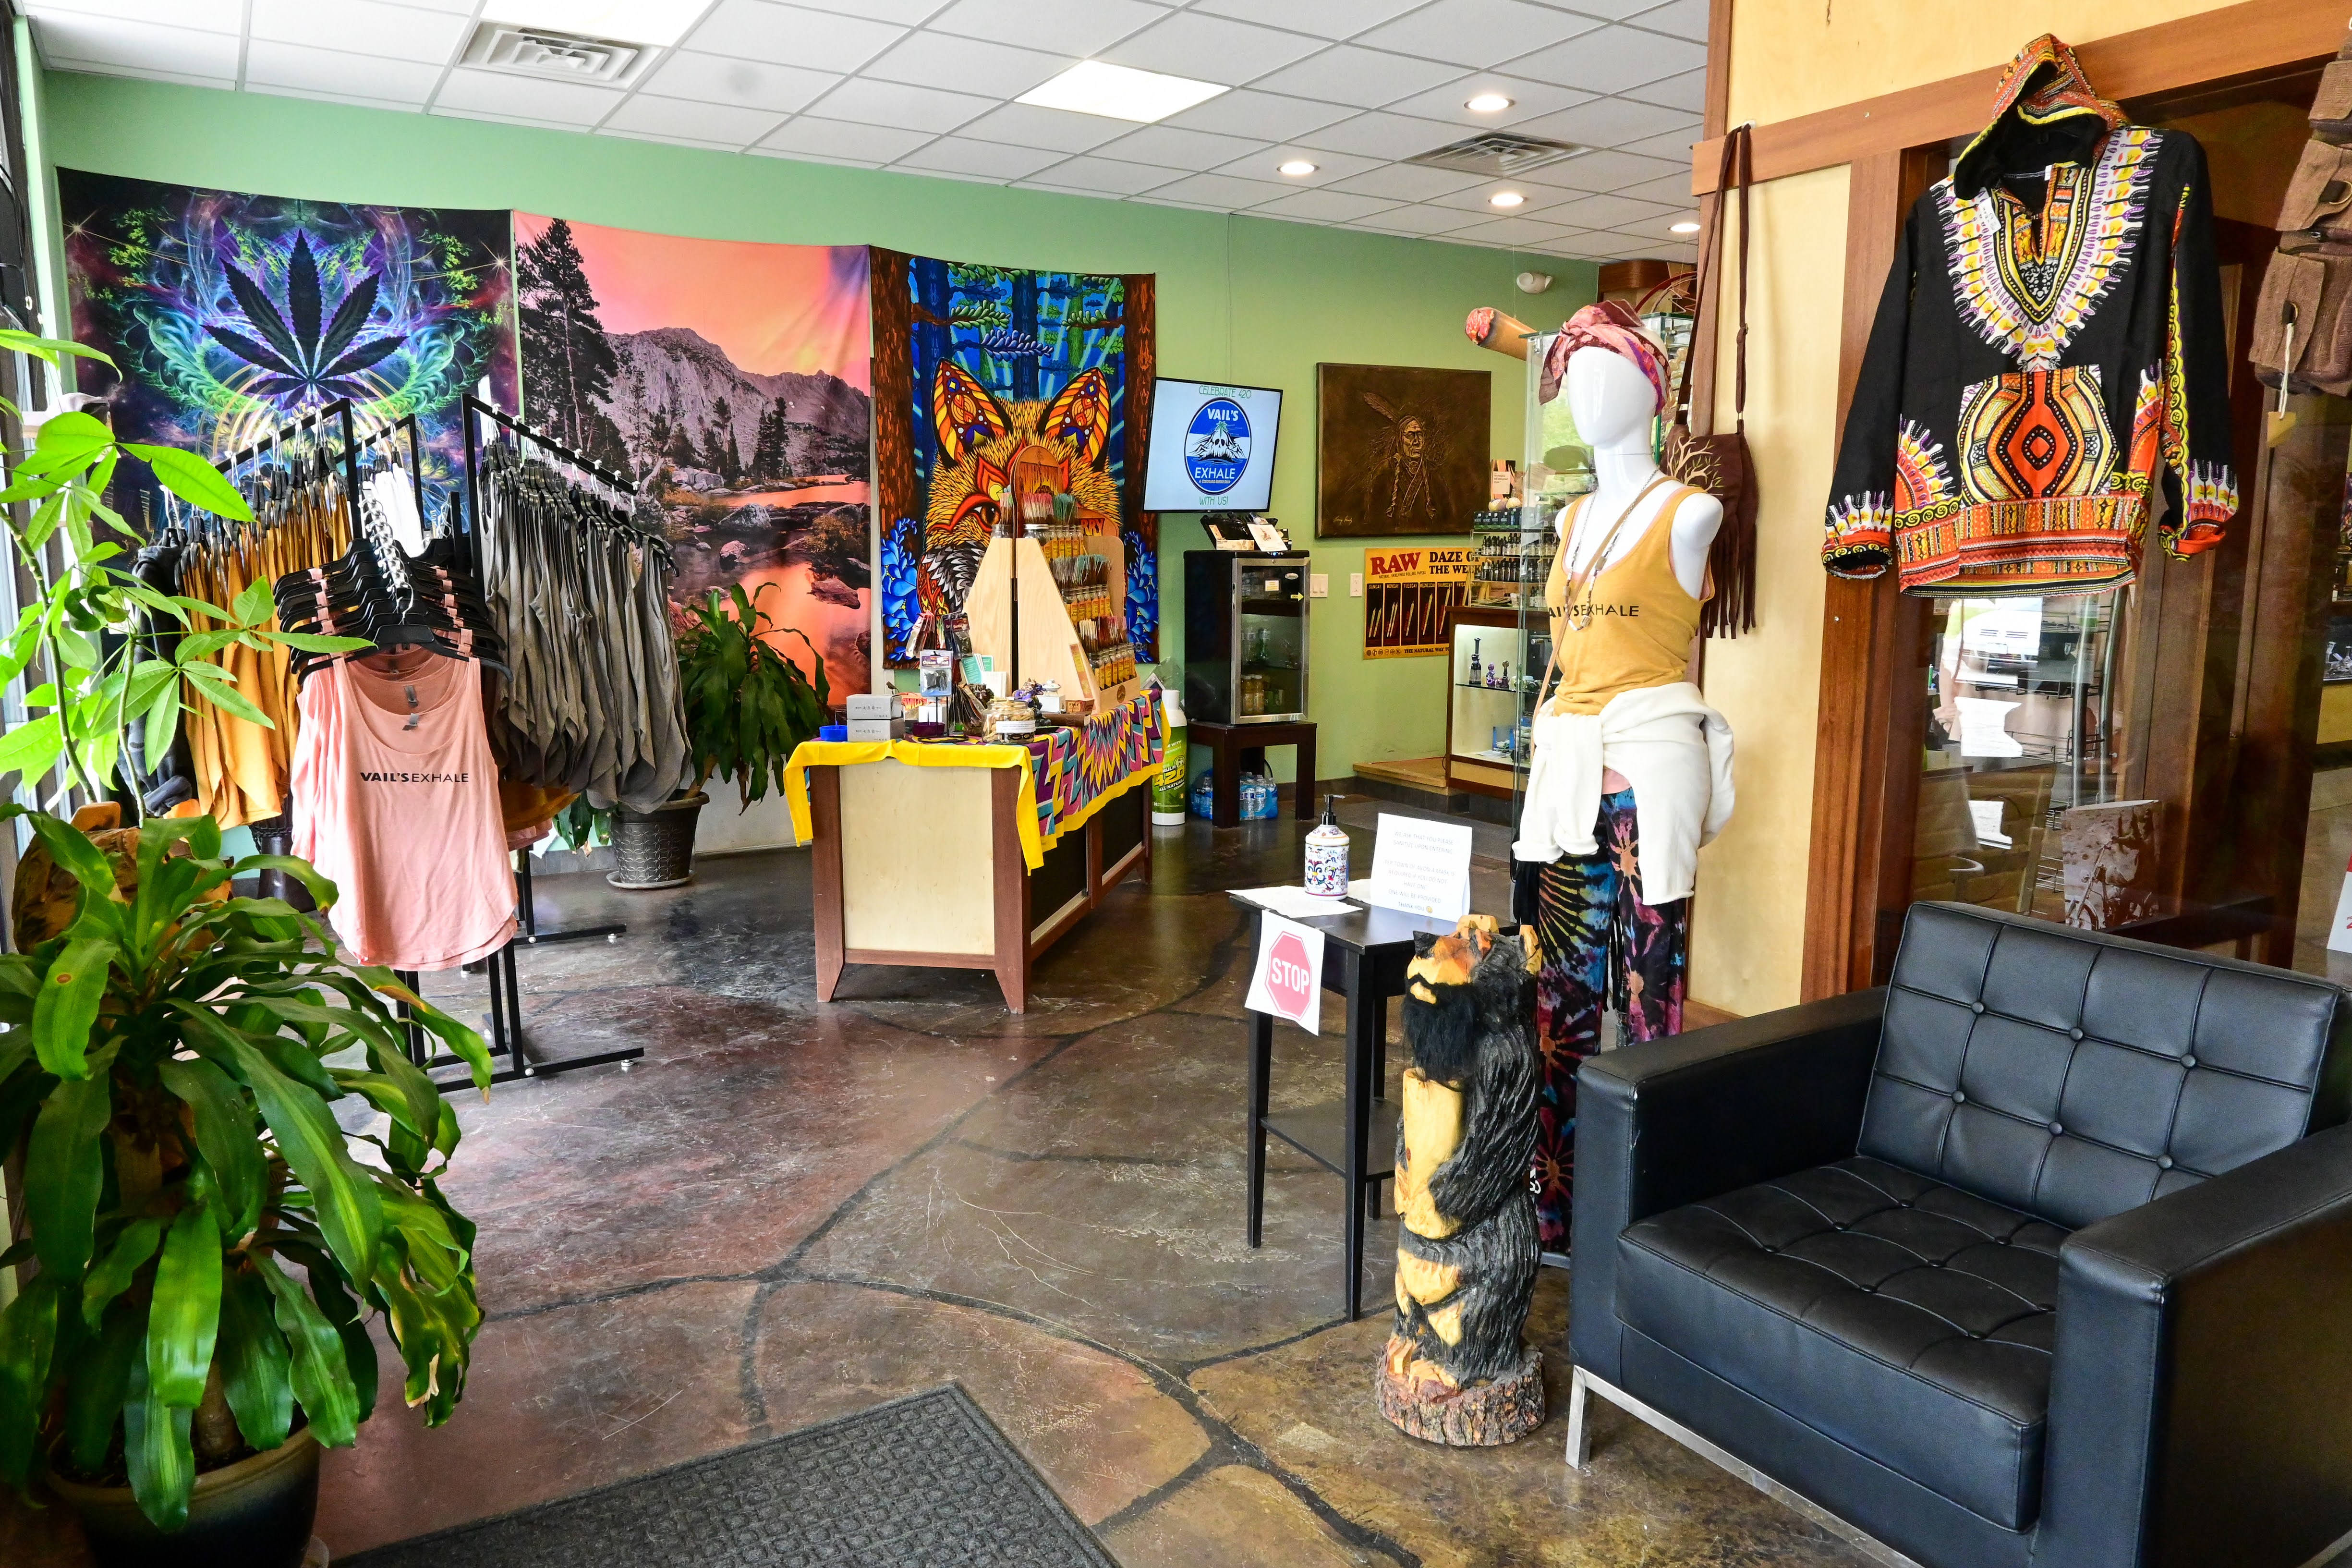 Interior of Vail's Exhale smoke shop featuring glass displays, pipes, and smoking accessories.